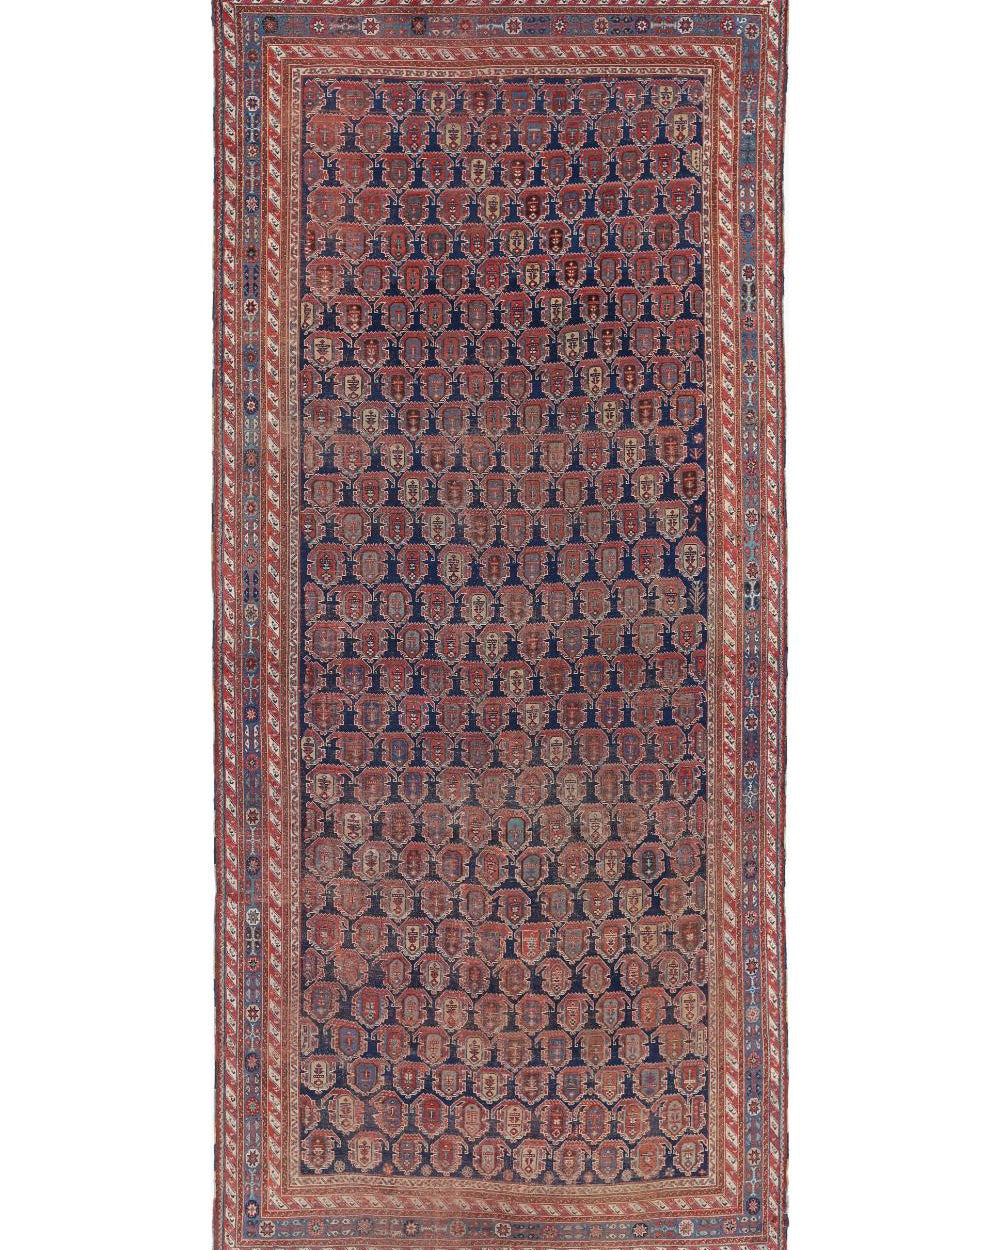 Afshar 6' 3" X 15' 1" Hand-Knotted Wool Rug 6' 3" X 15' 1" (191 X 460) / Blue / Rust